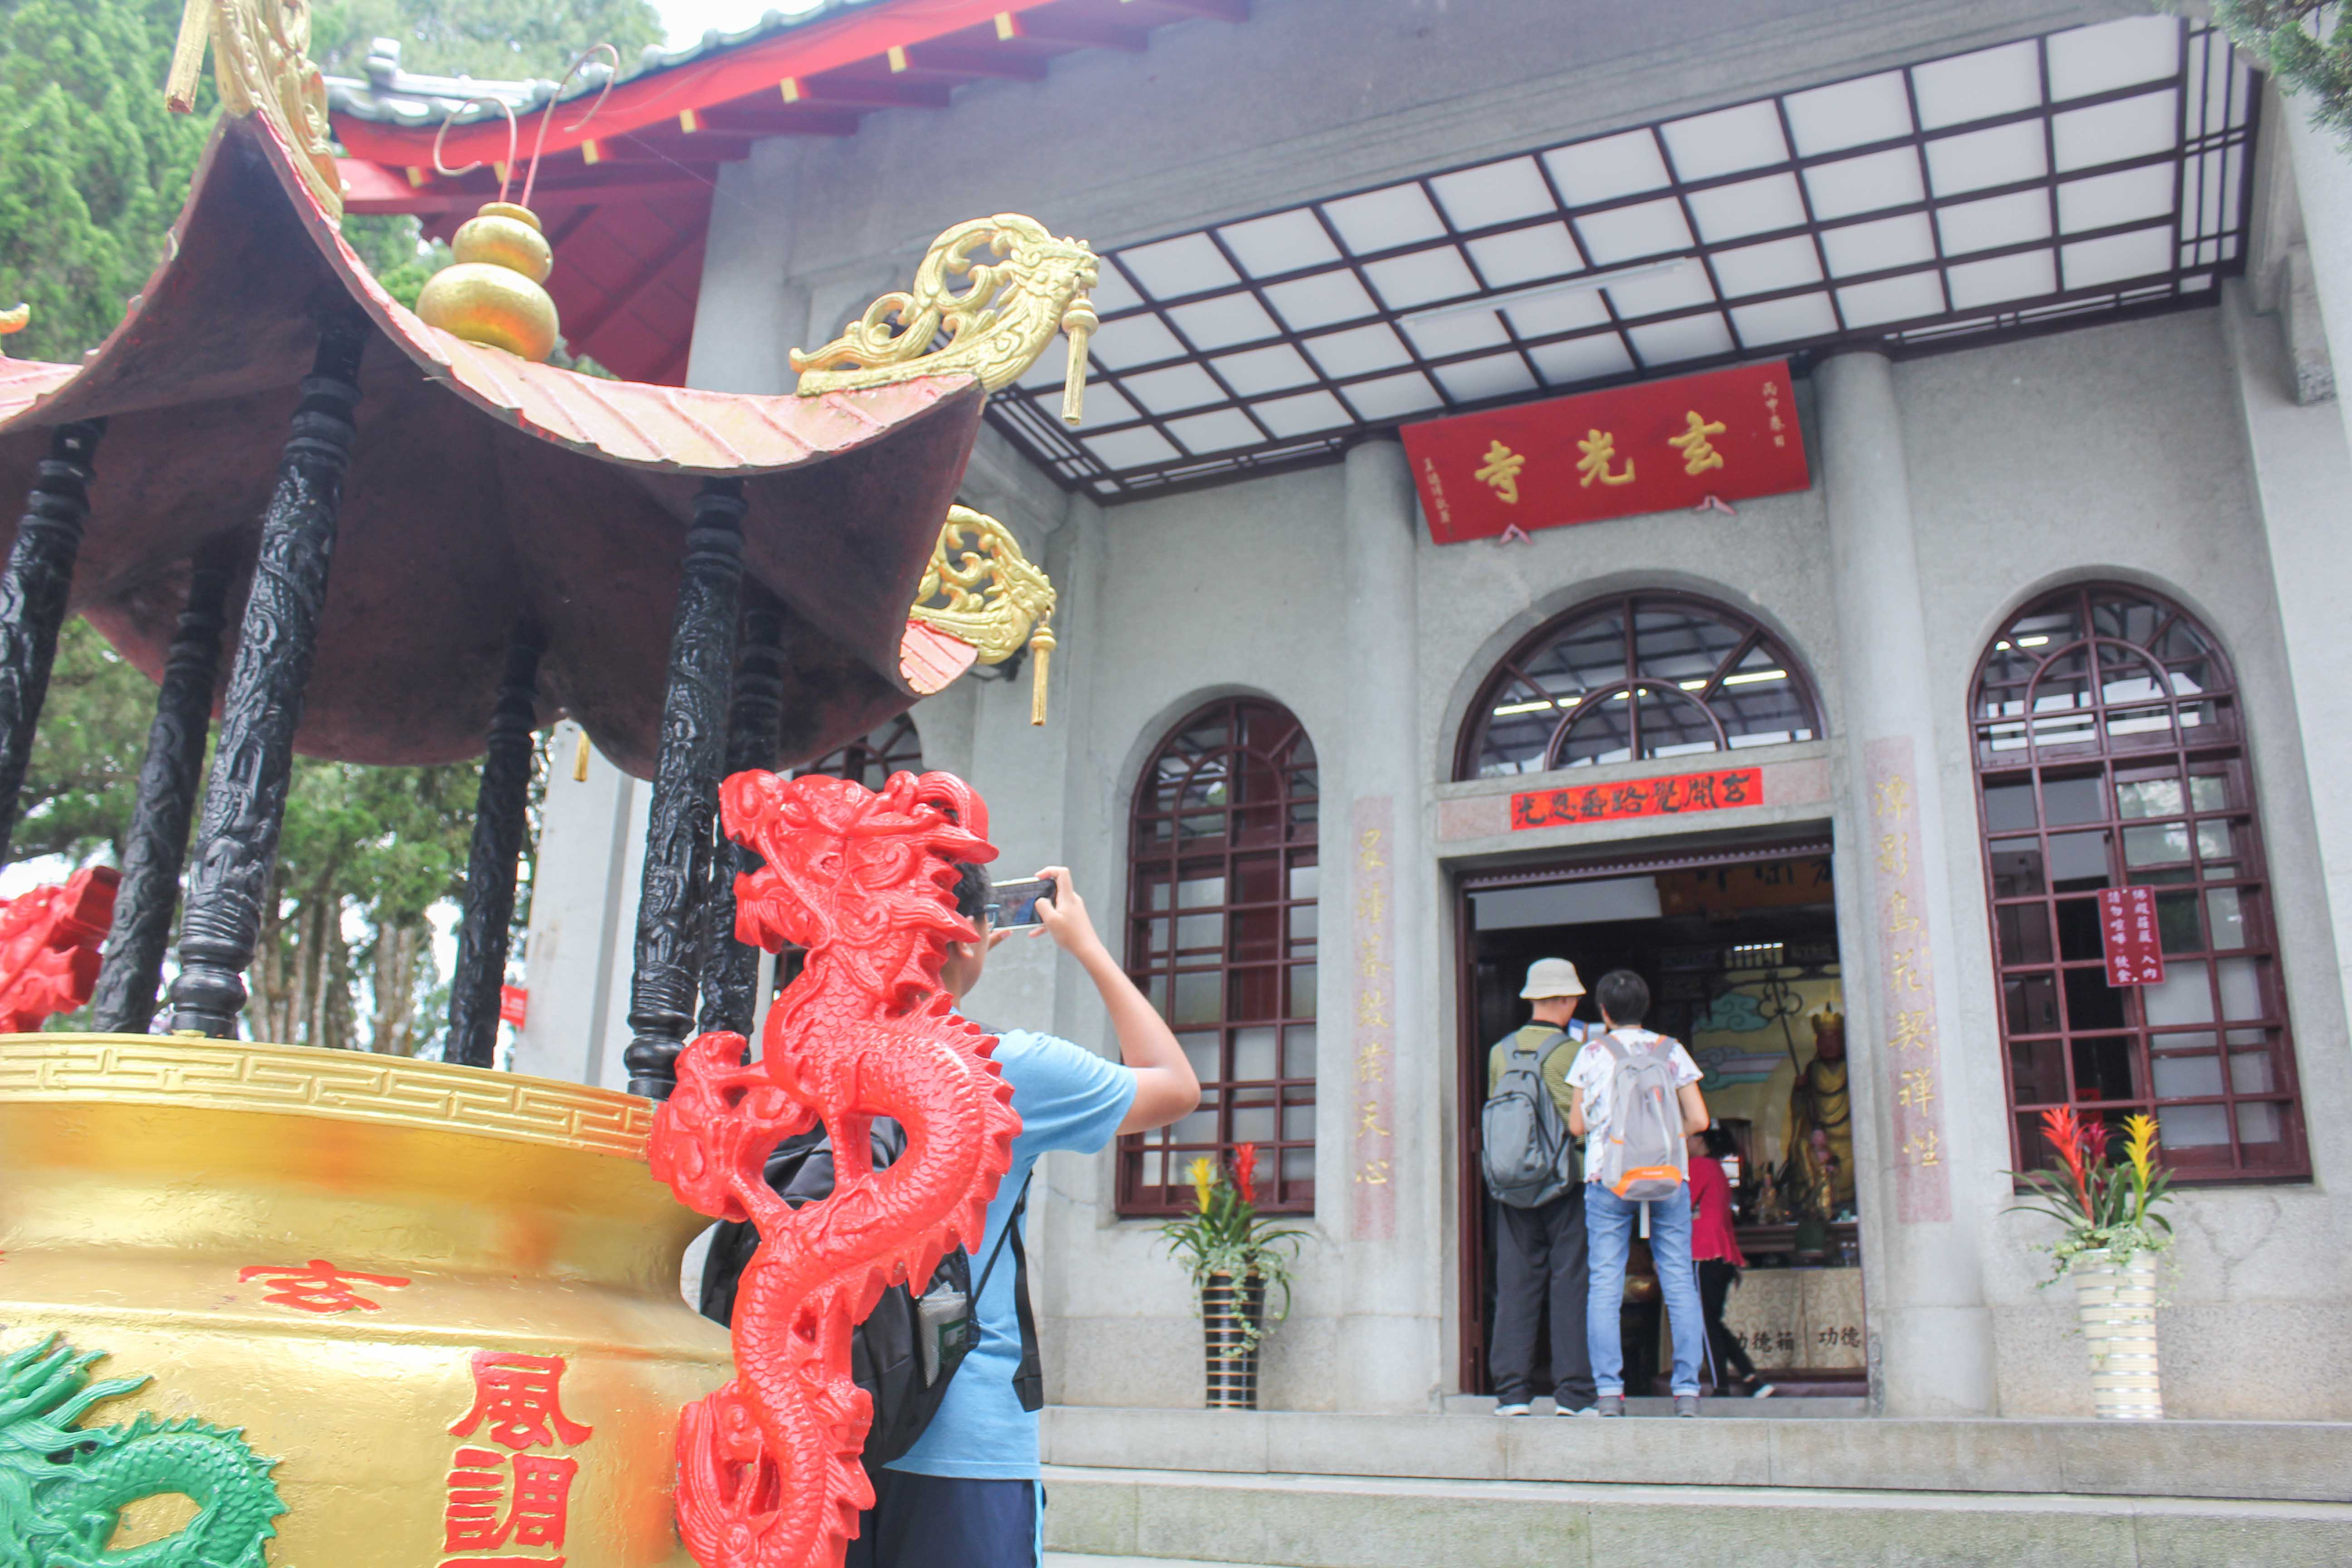 Entrance, Xuanguang Temple